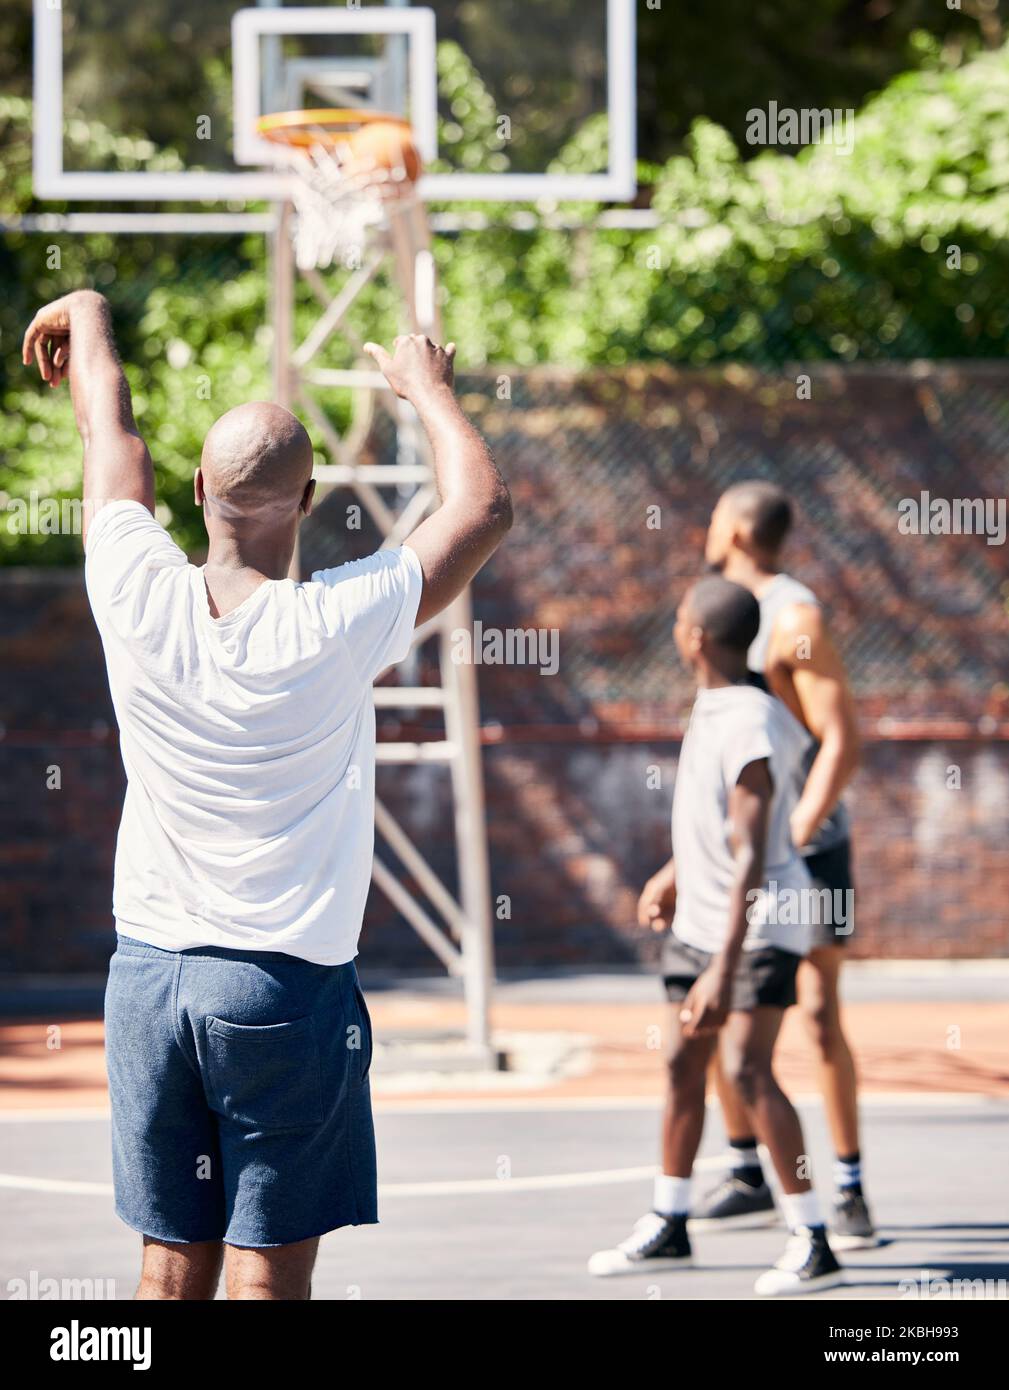 Basketball player, score and point in sports game for goal, victory or winning throw at the court outdoors. Man in basketball sport playing, scoring Stock Photo